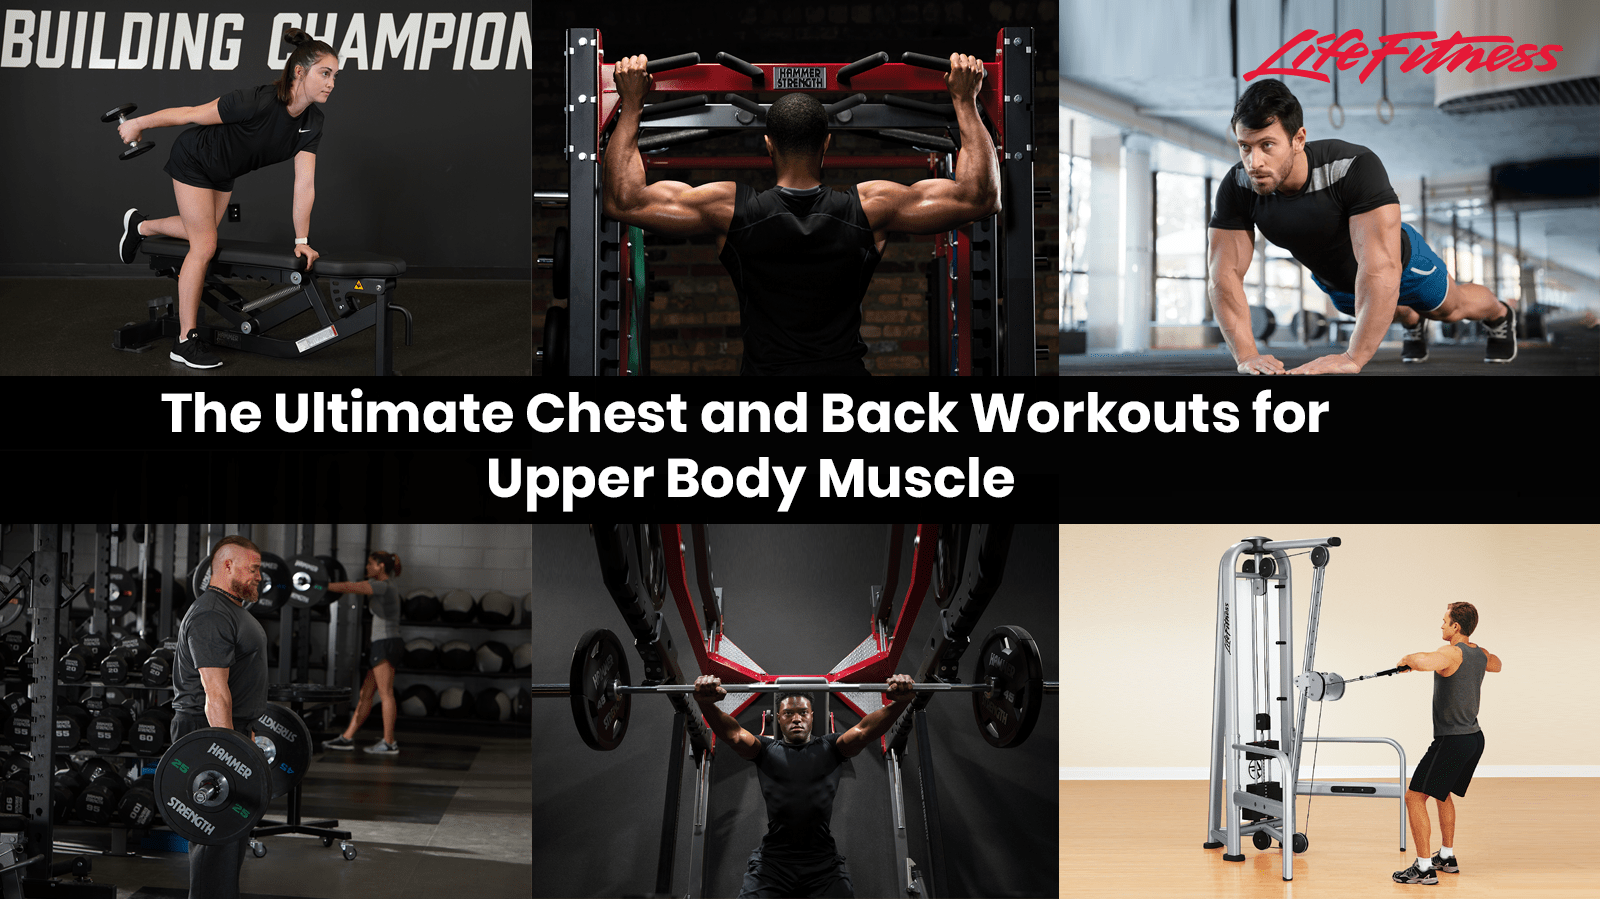 The Ultimate Chest and Back Workouts for Upper Body Muscle